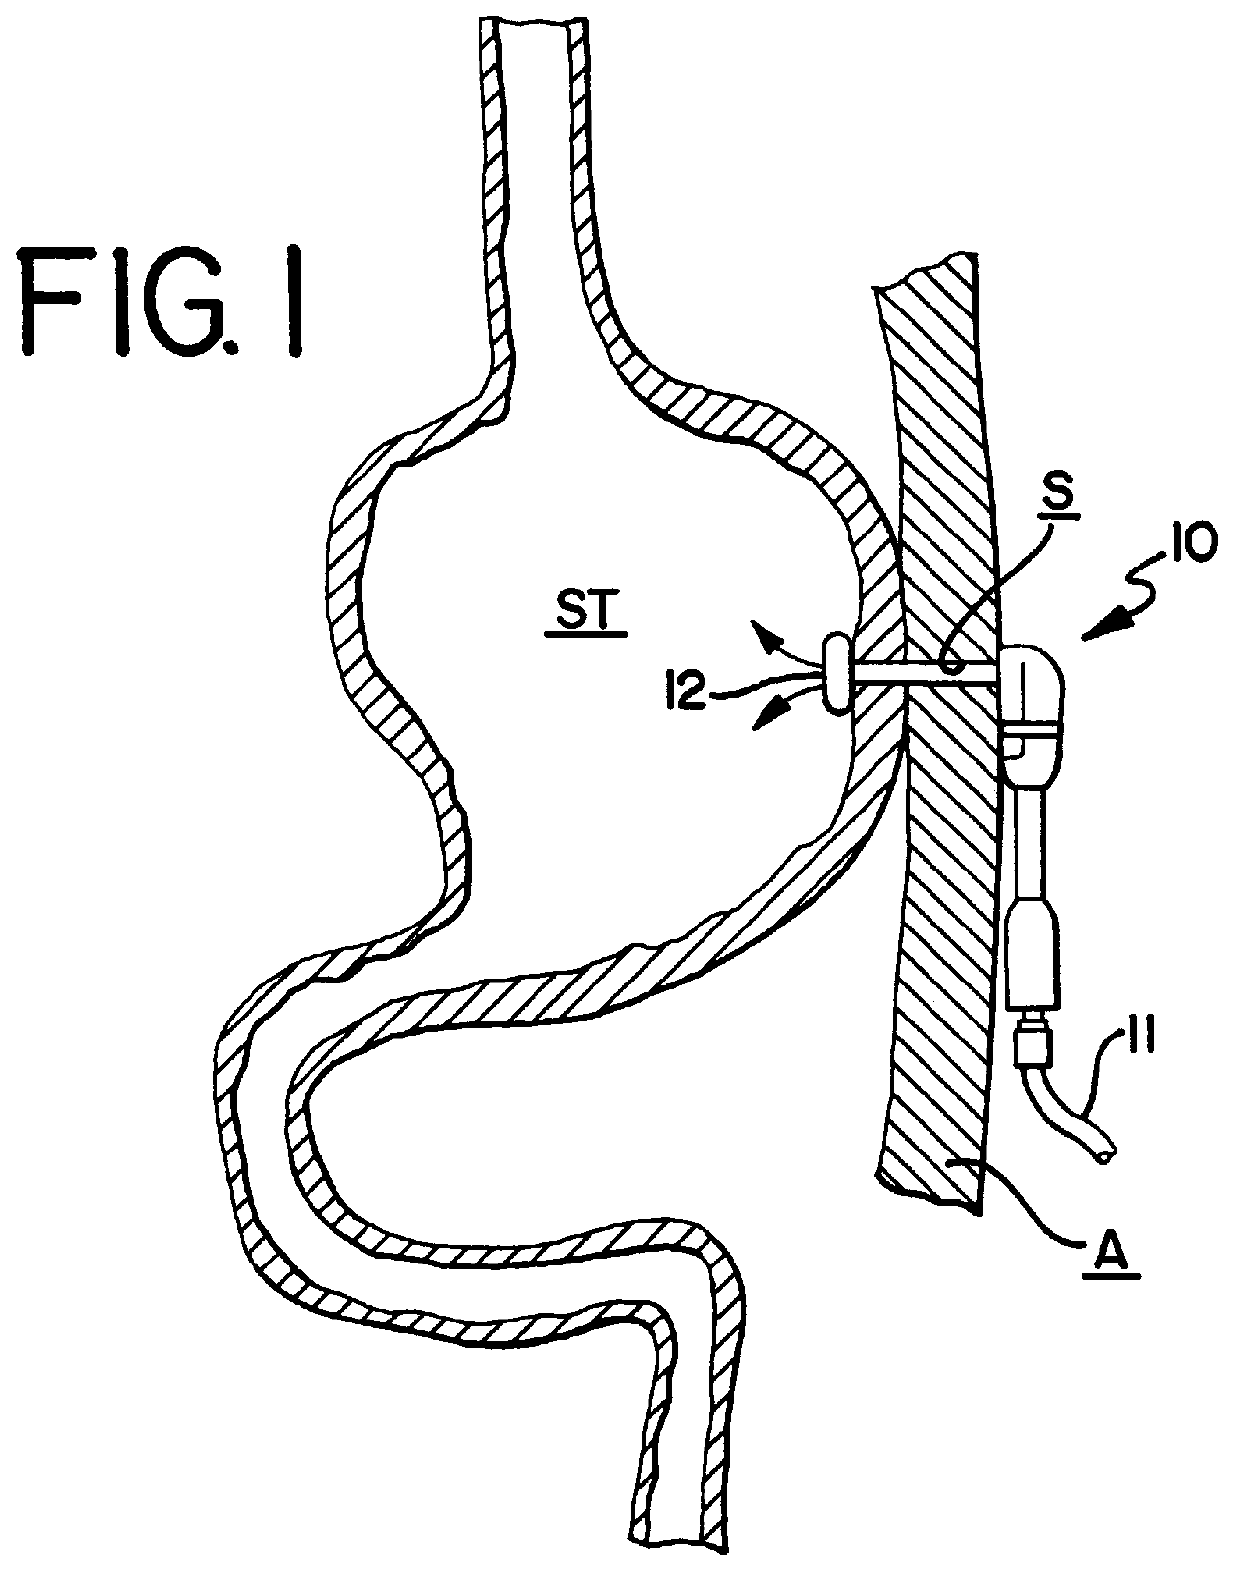 Retention balloon for a corporeal access tube assembly